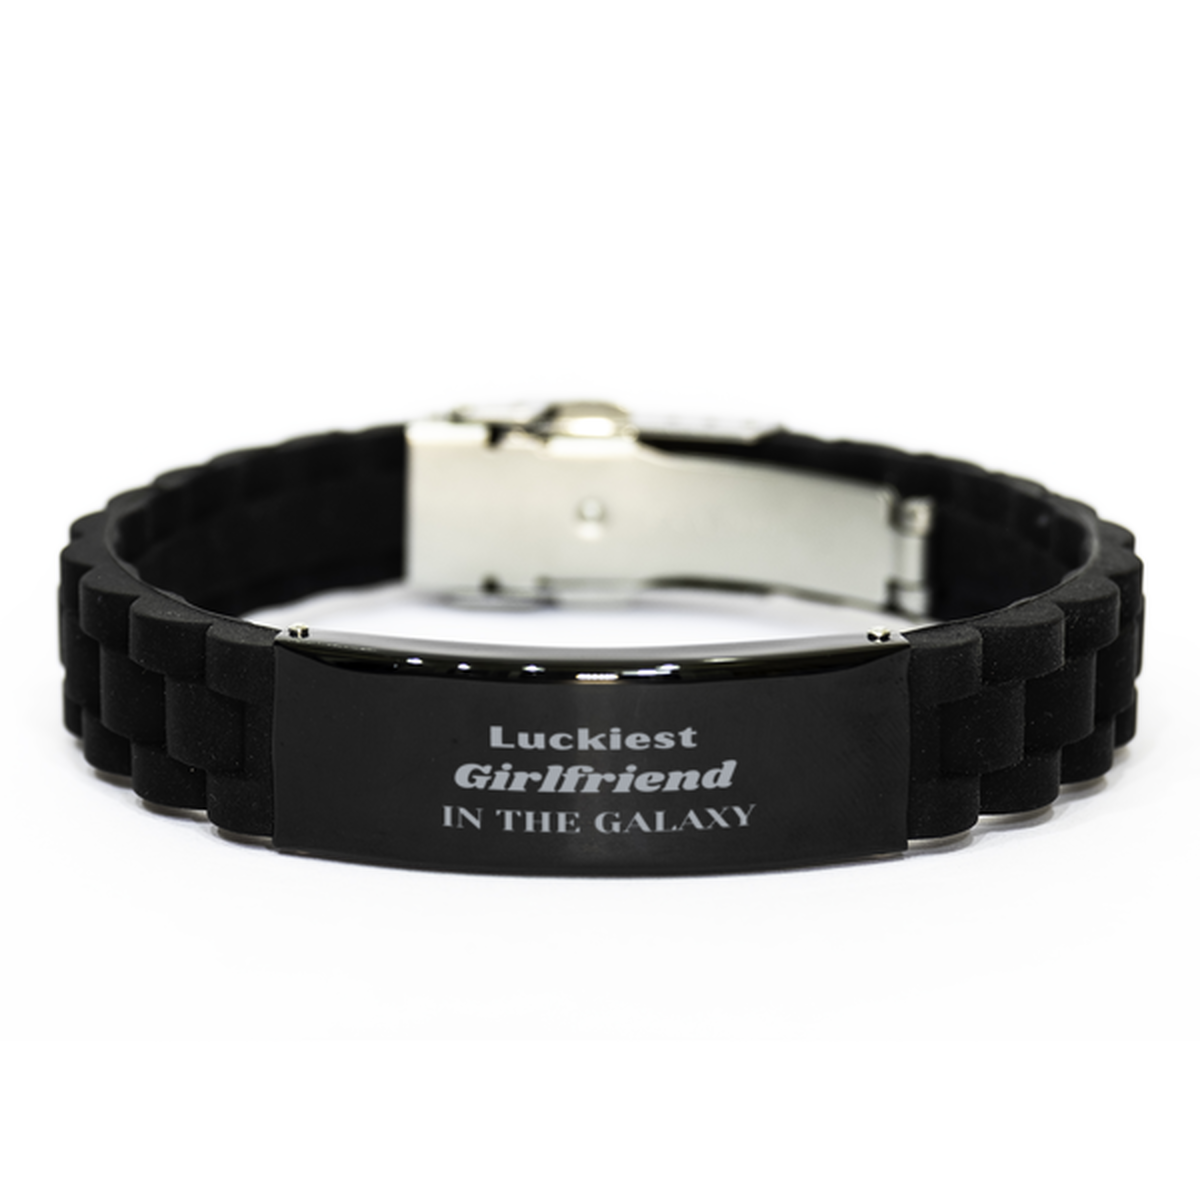 Luckiest Girlfriend in the Galaxy, To My Girlfriend Engraved Gifts, Christmas Girlfriend Black Glidelock Clasp Bracelet Gifts, X-mas Birthday Unique Gifts For Girlfriend Men Women